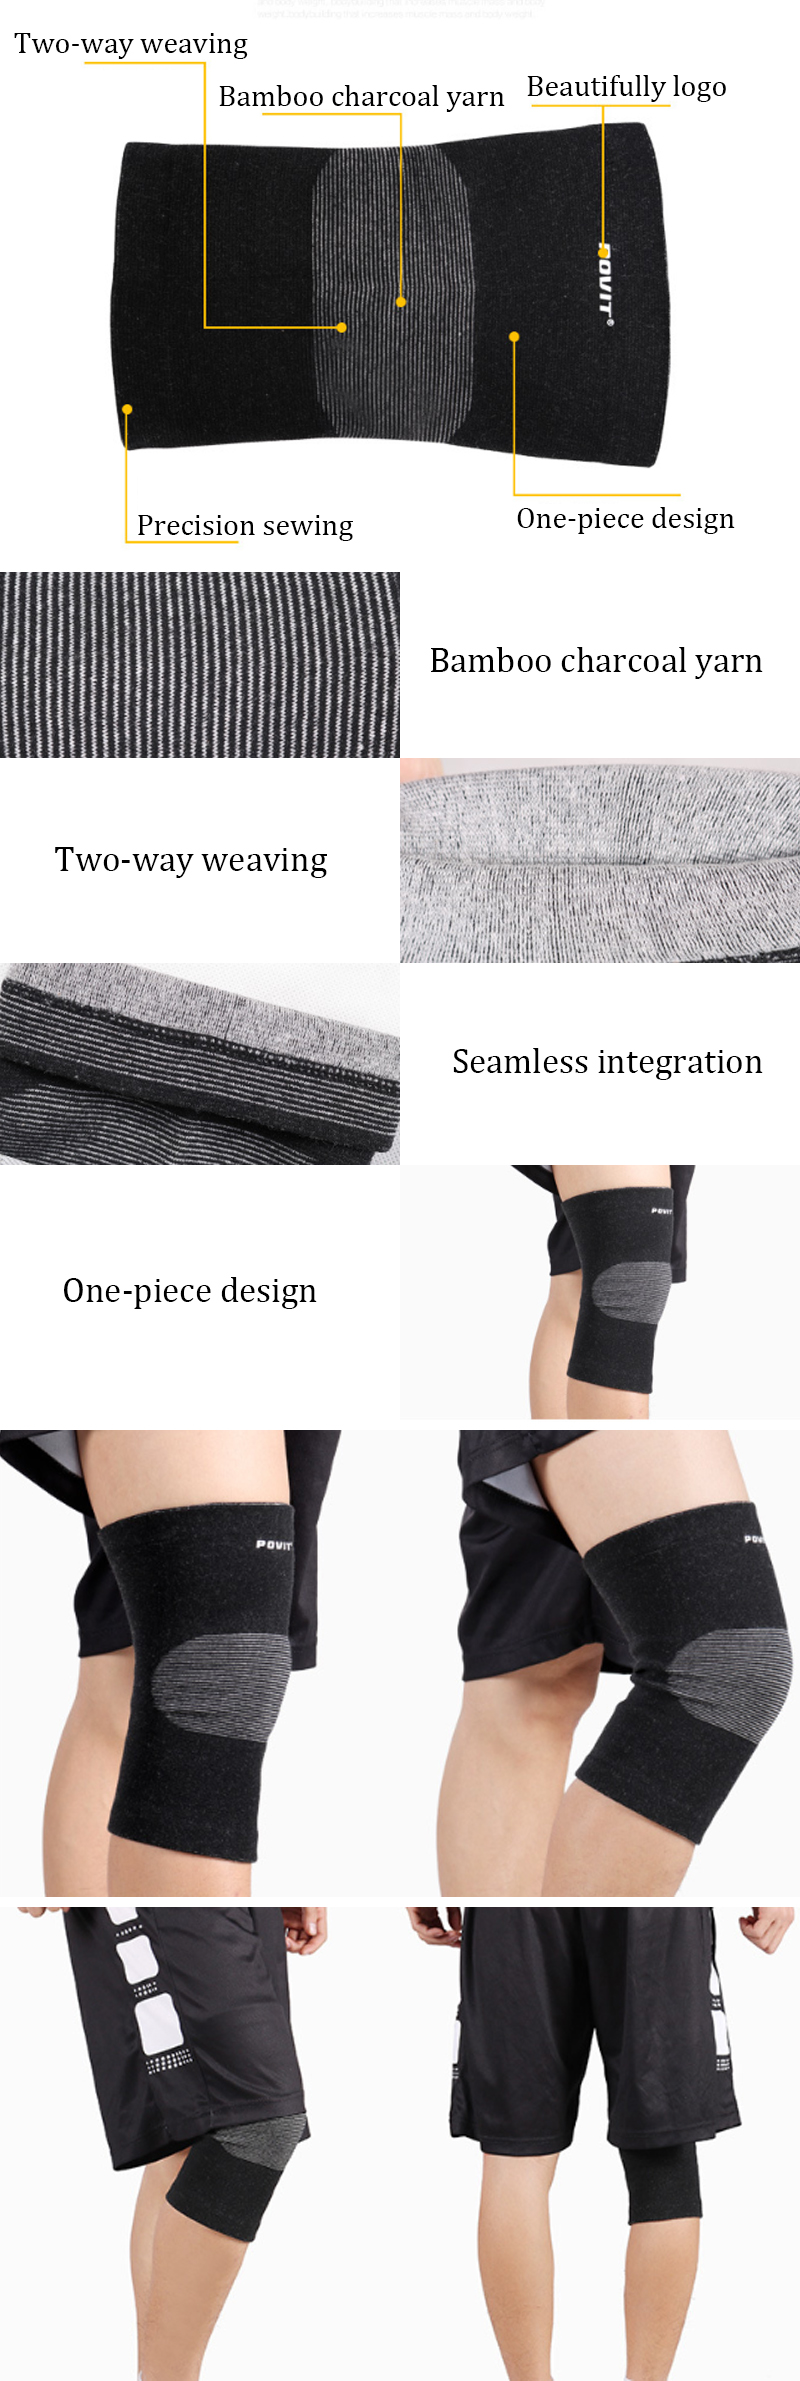 KALOAD-1-Pcs-Knee-Pad-Exercsie-Running-Cycling-Knee-Support-Breathable-Knee-Brace-Sports-Fitness-Pro-1397901-1